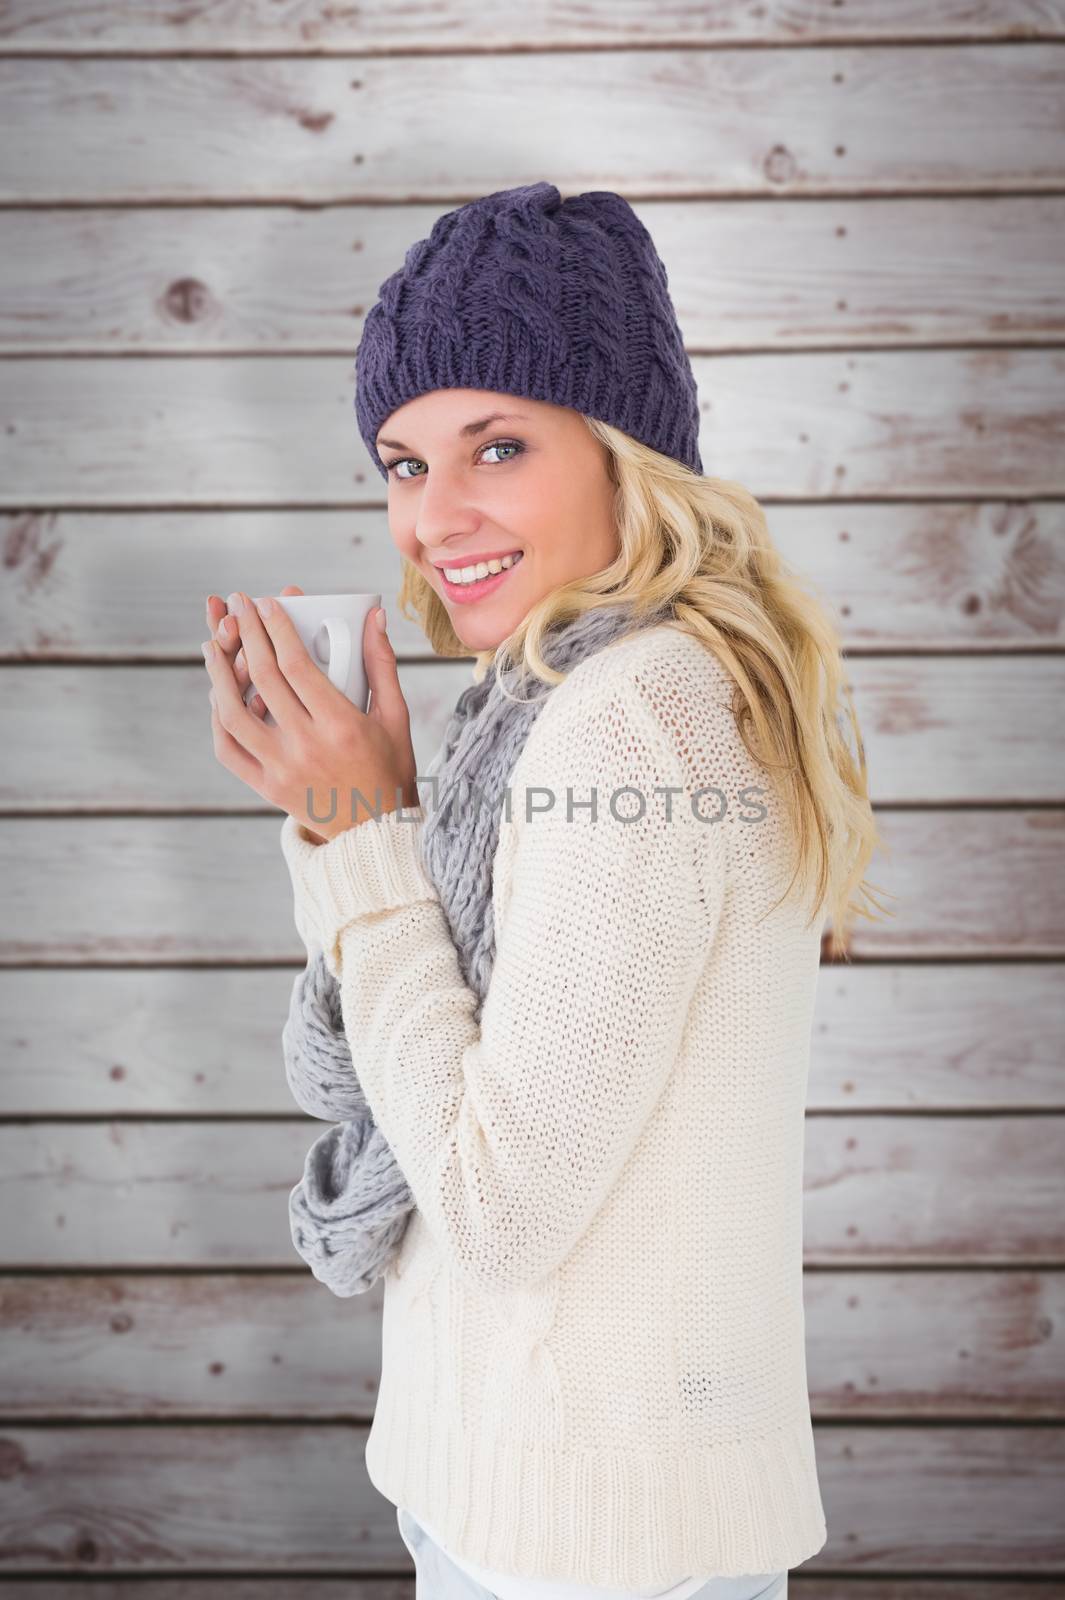 Pretty blonde in winter fashion holding mug against wooden planks